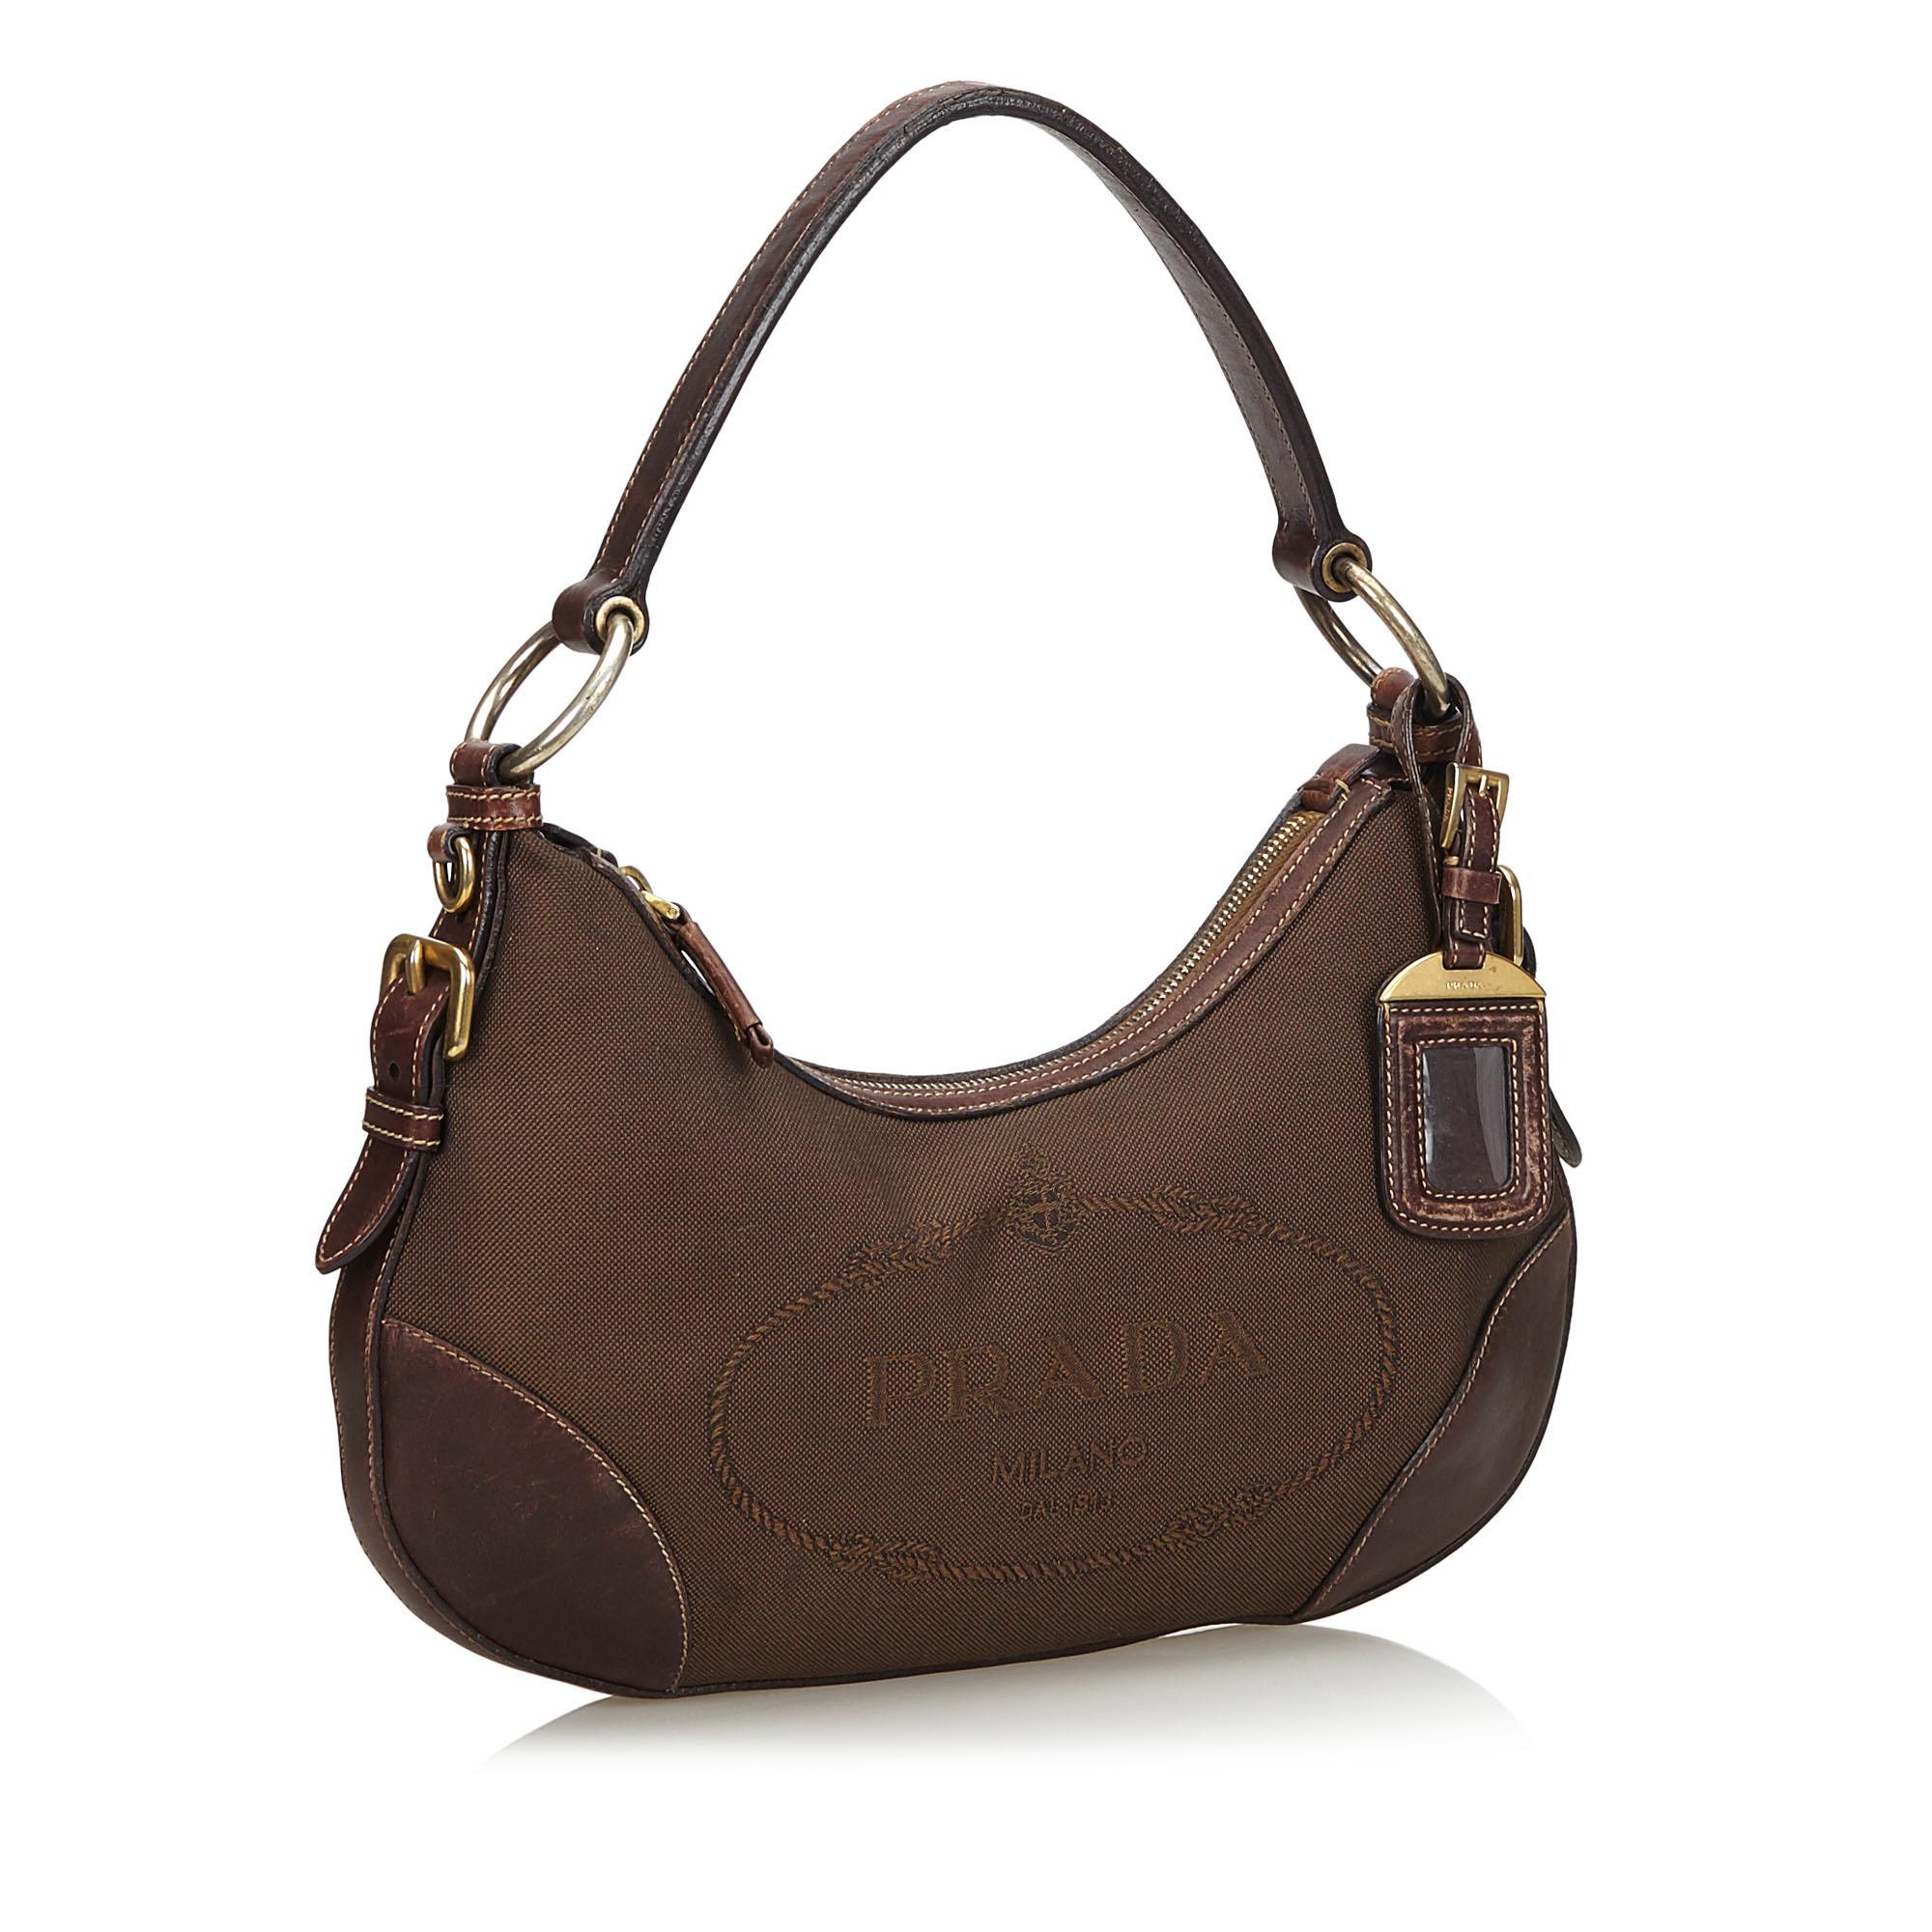 This shoulder bag features a canvas body with leather trim, a flat leather strap, a top zip closure, and an interior zip pocket. It carries as B+ condition rating.

Inclusions: 
Authenticity Card

Dimensions:
Length: 20.00 cm
Width: 33.00 cm
Depth: